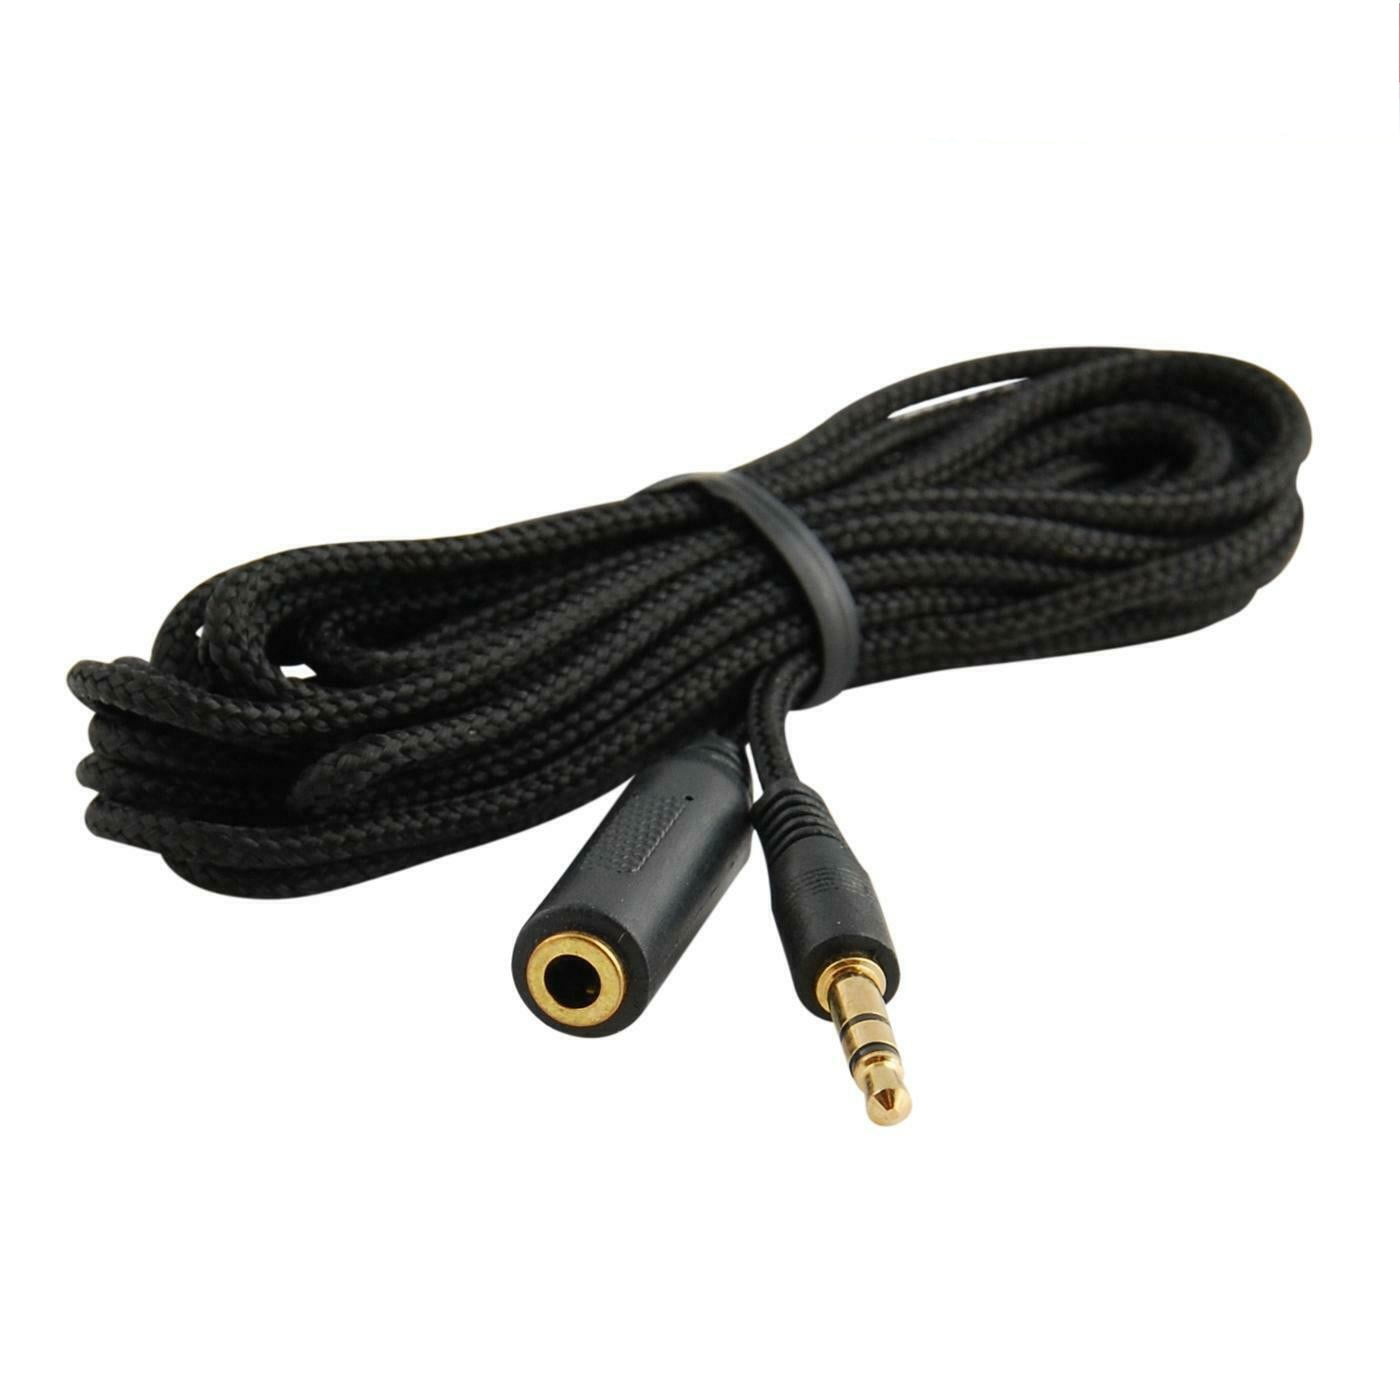 New 3.5mm 1/8" Headphone Audio Replacement Cable Car AUX Cord For Soul Elite Hot 